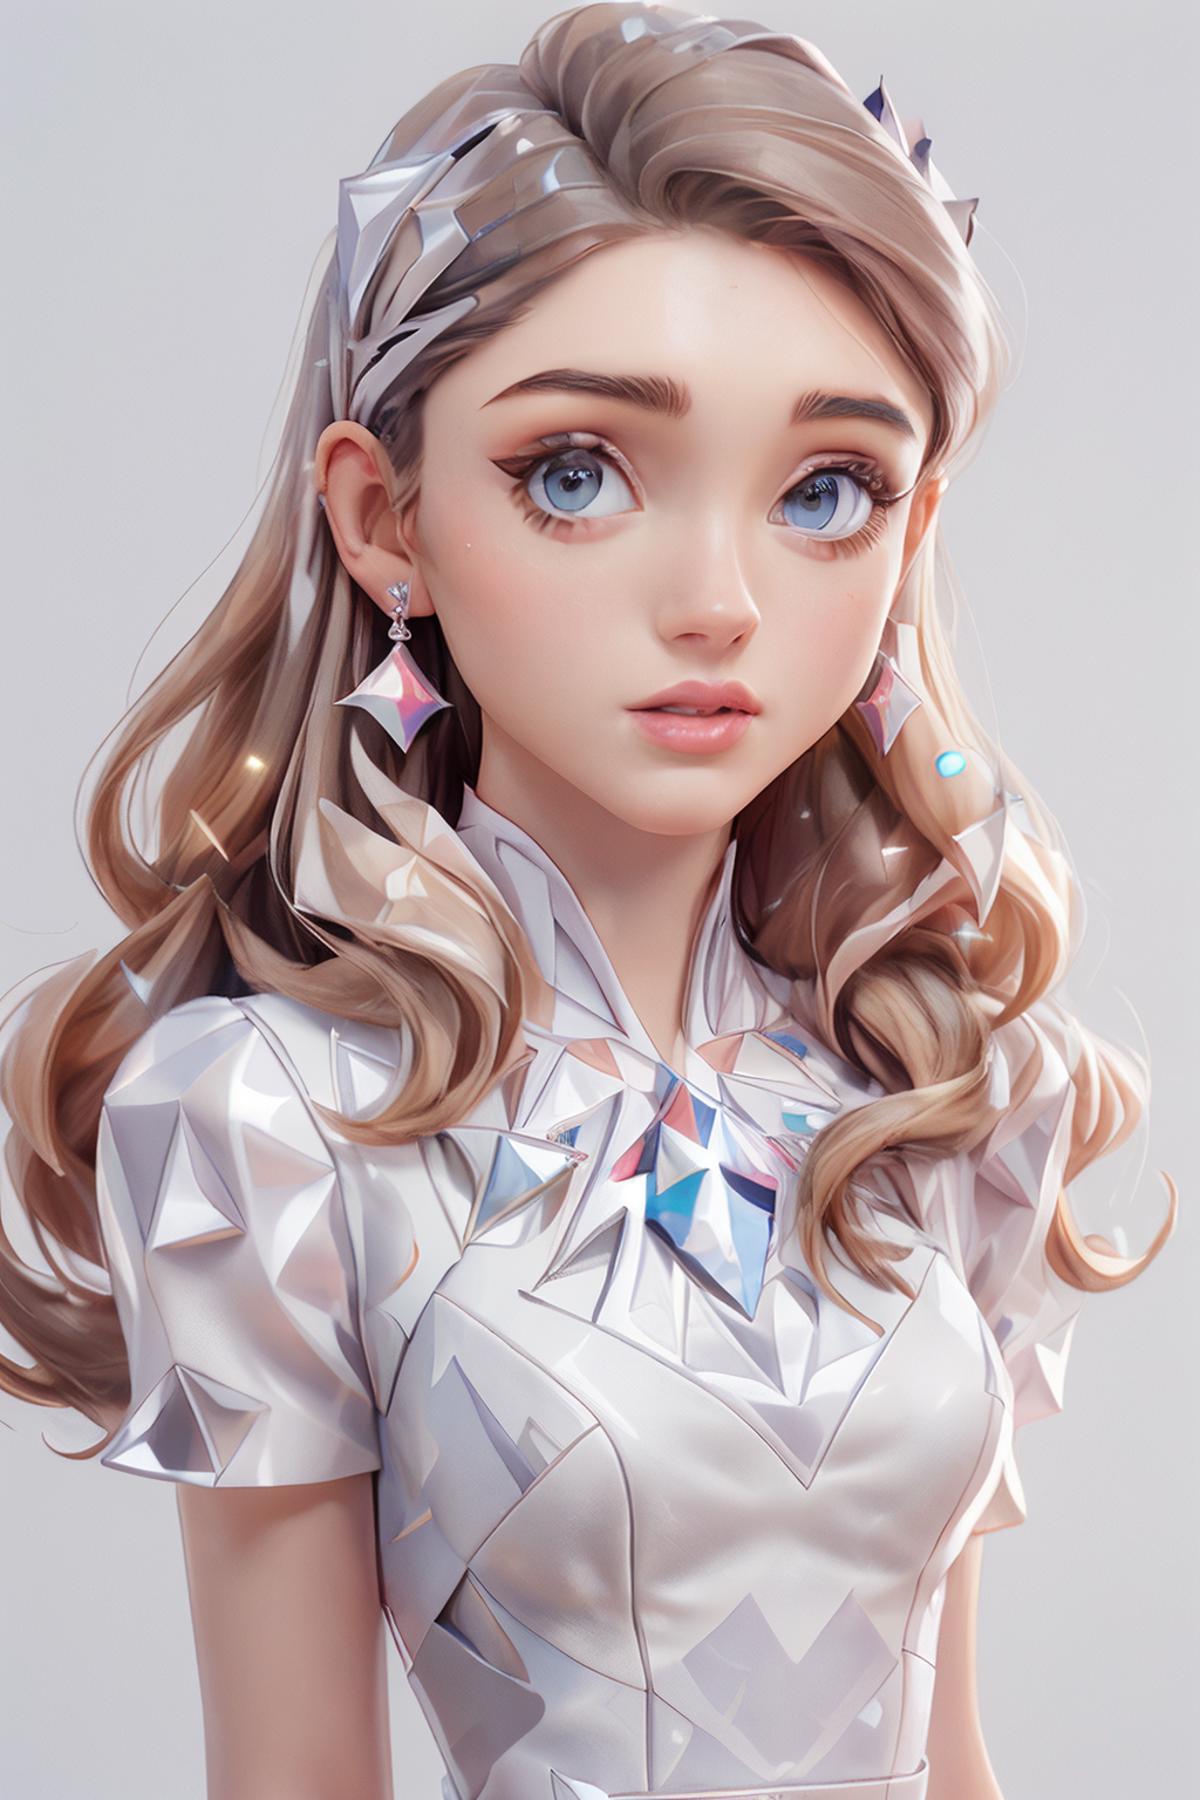 AI model image by __2_